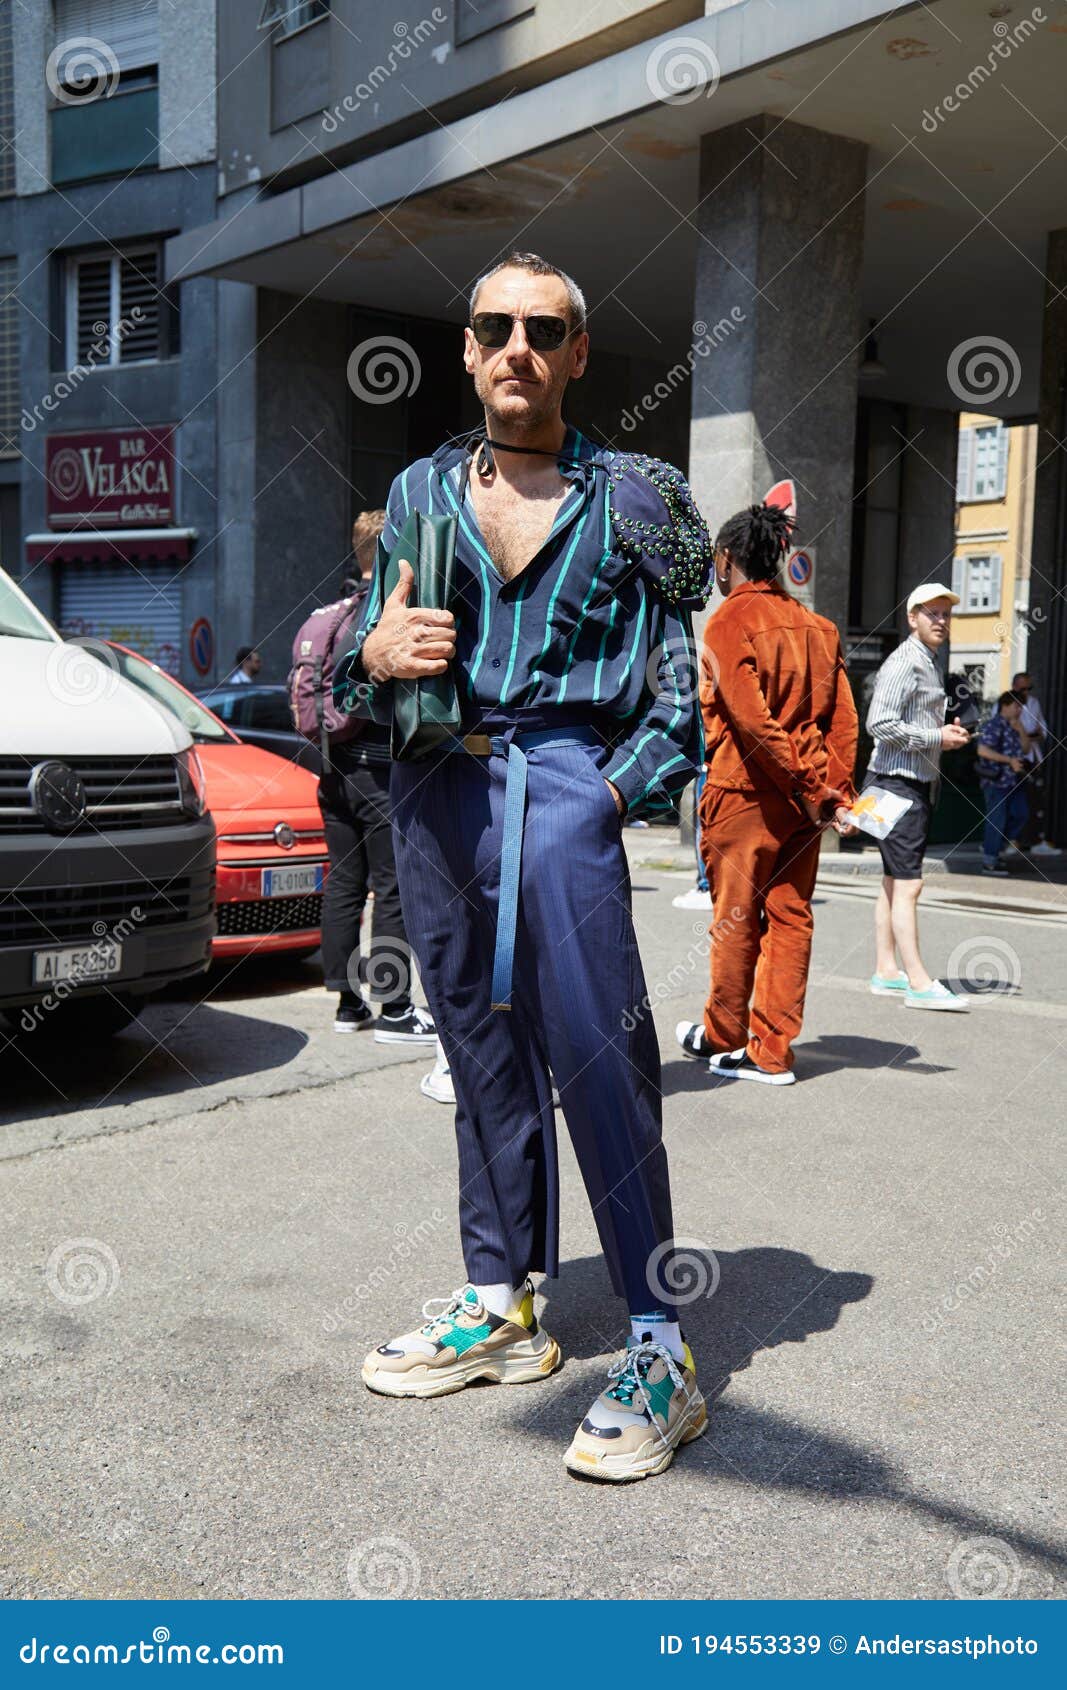 Man with Blue and Green Striped Shirt and Balenciaga Shoes before Marni  Fashion Show, Milan Fashion Week Street Editorial Stock Image - Image of  illustrative, sunglasses: 194553339